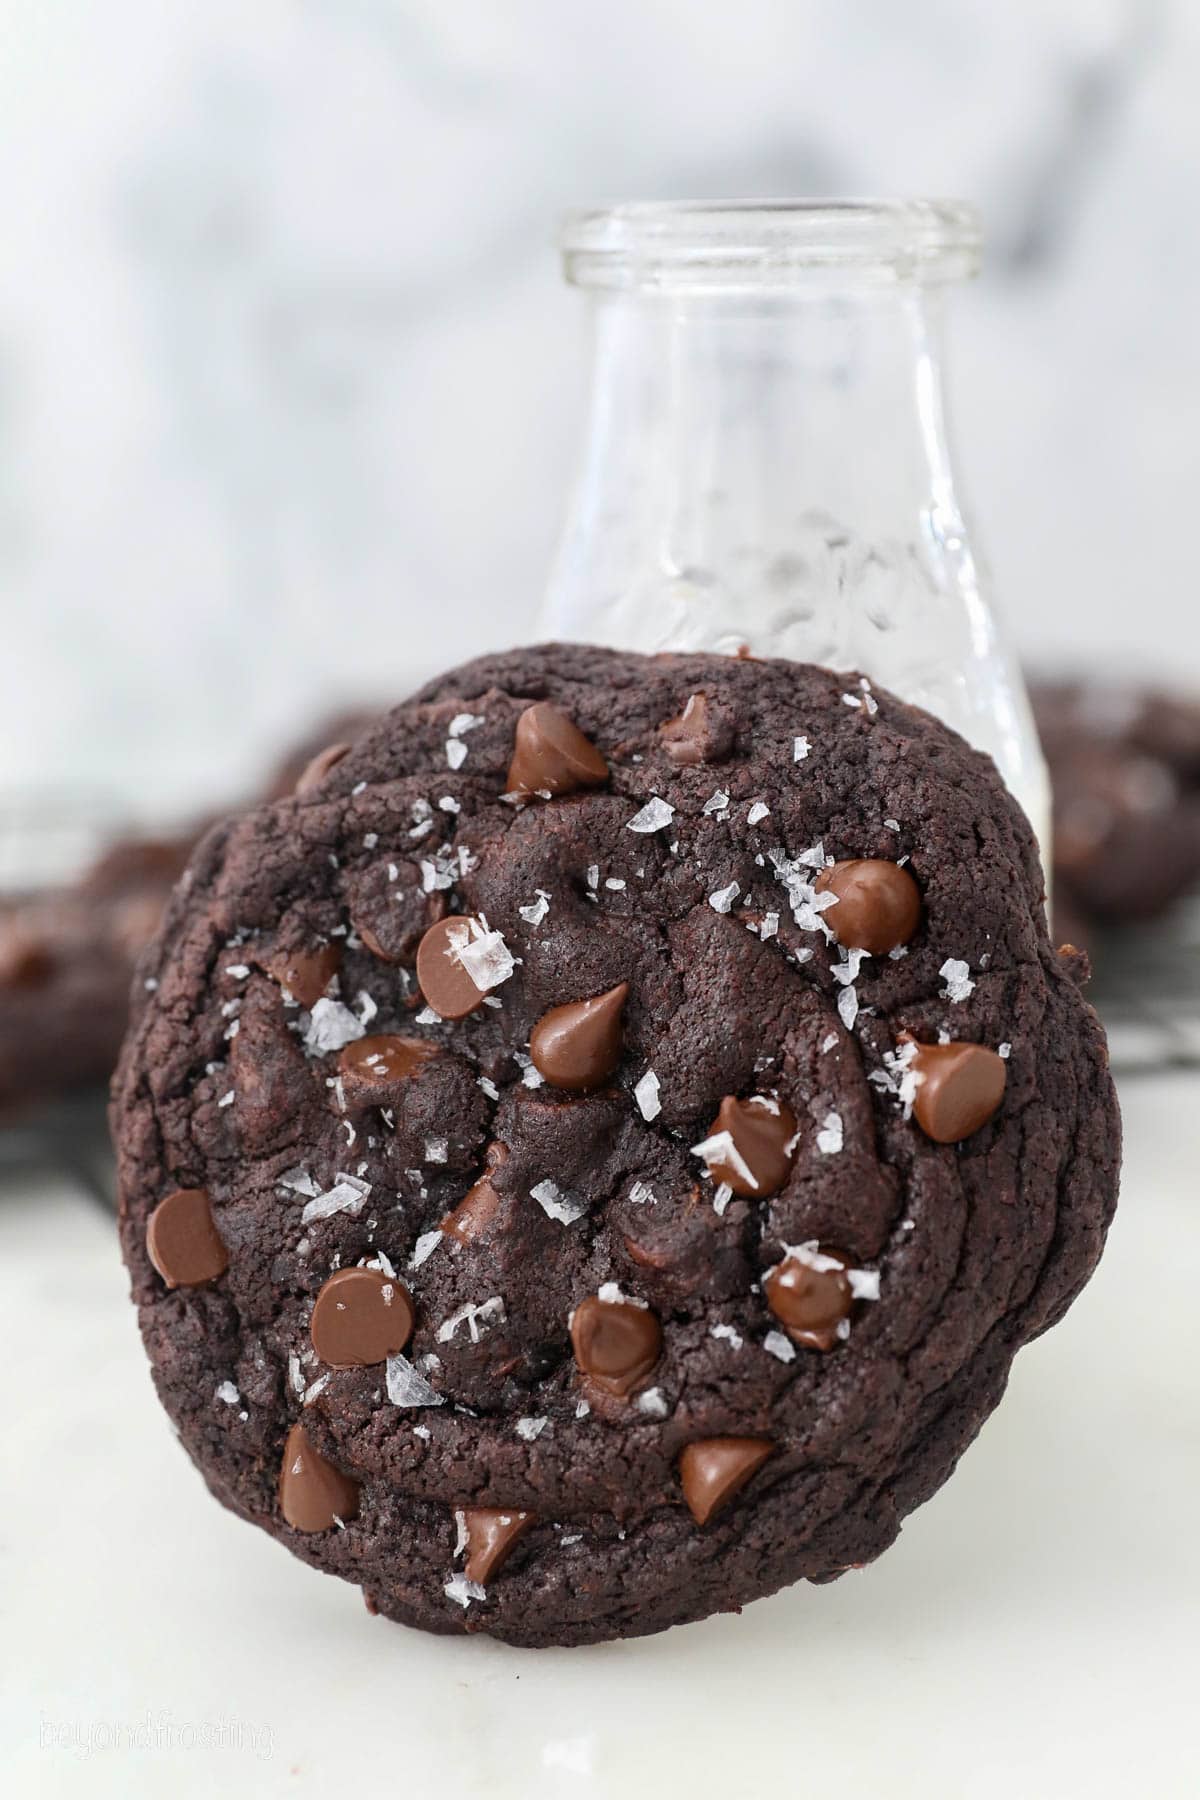 A giant chocolate cookie sprinkled with flaked sea salt leaning against a glass of milk.